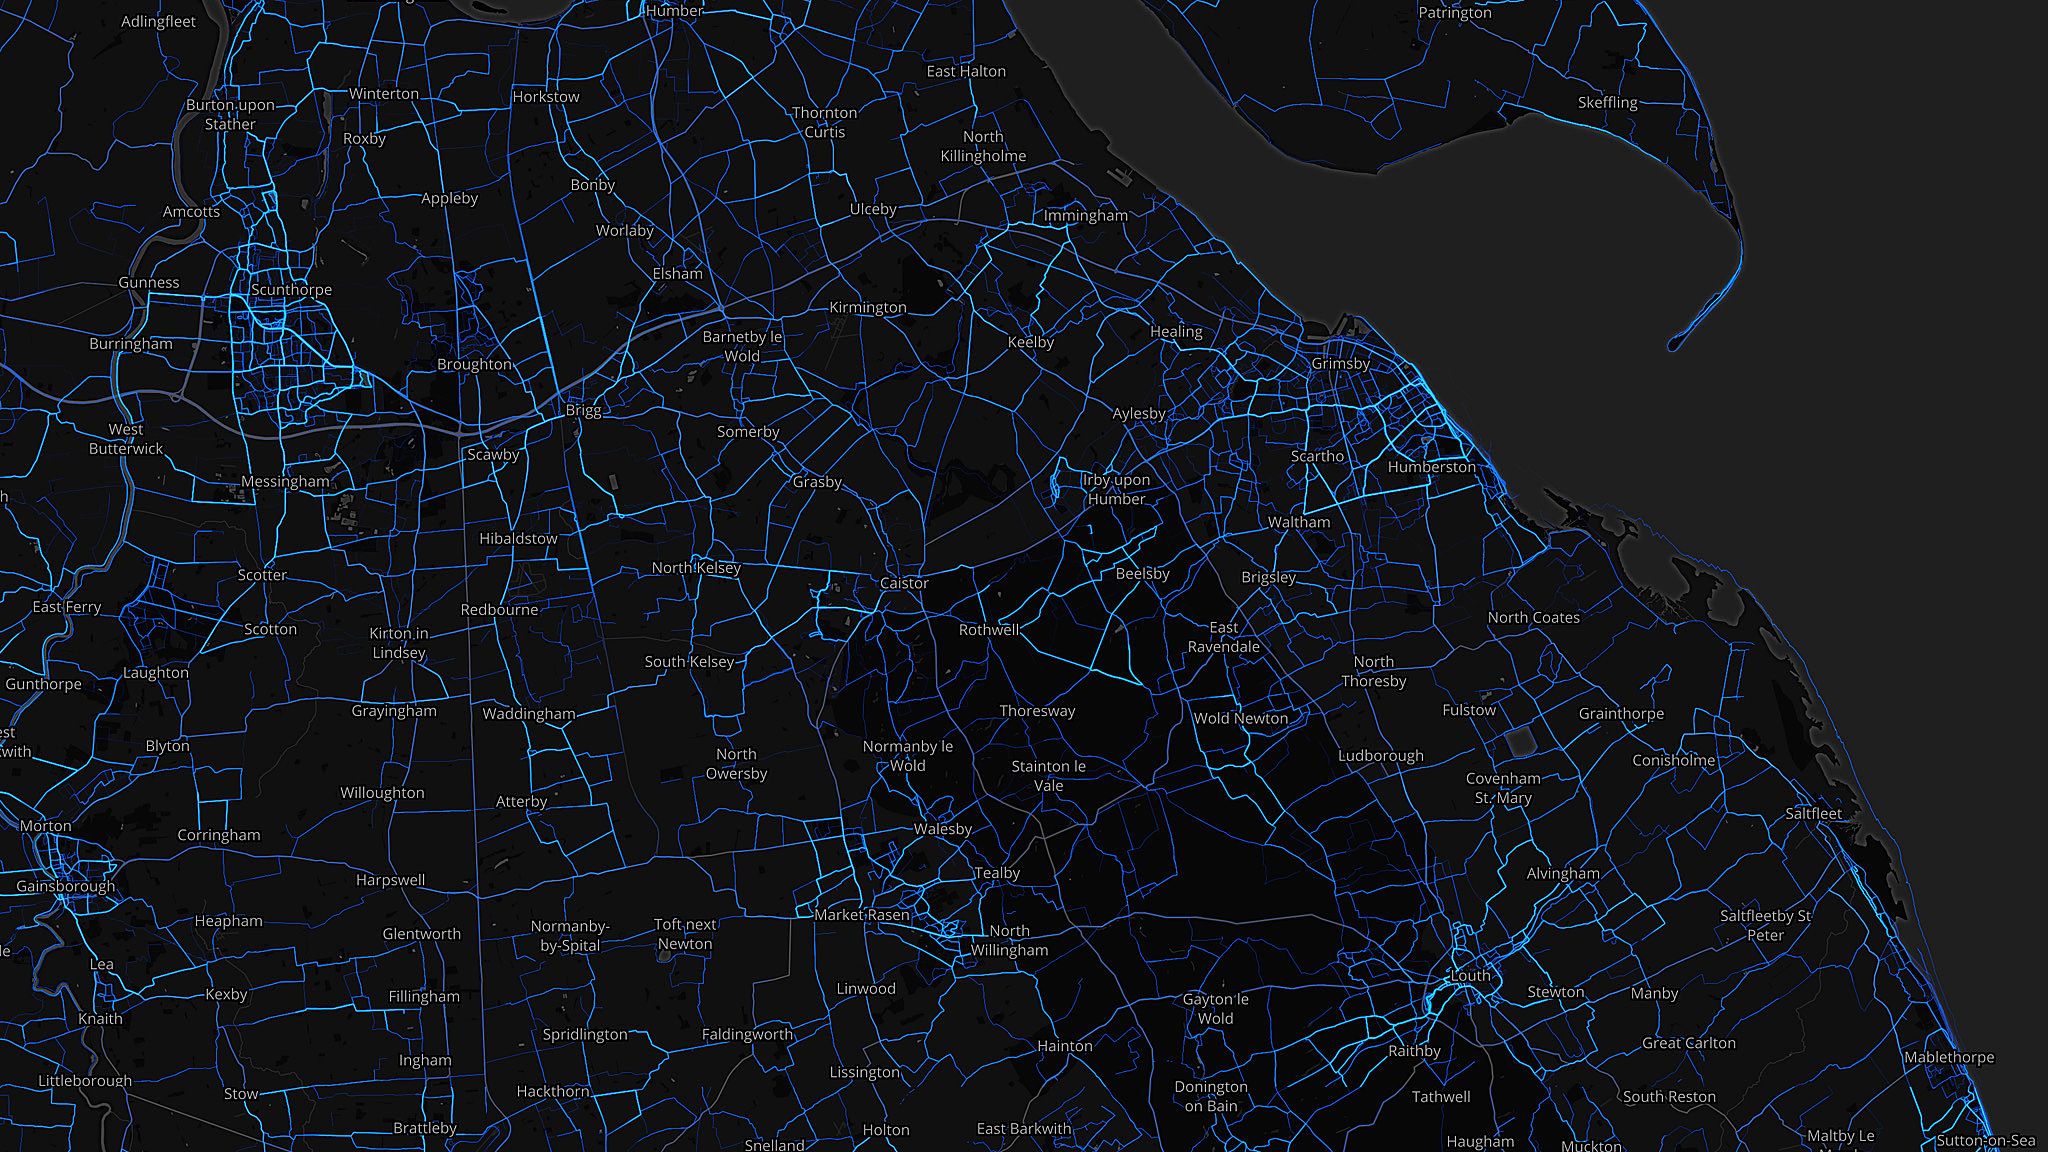 North East Lincolnshire - running routes (by Strava users 2015)